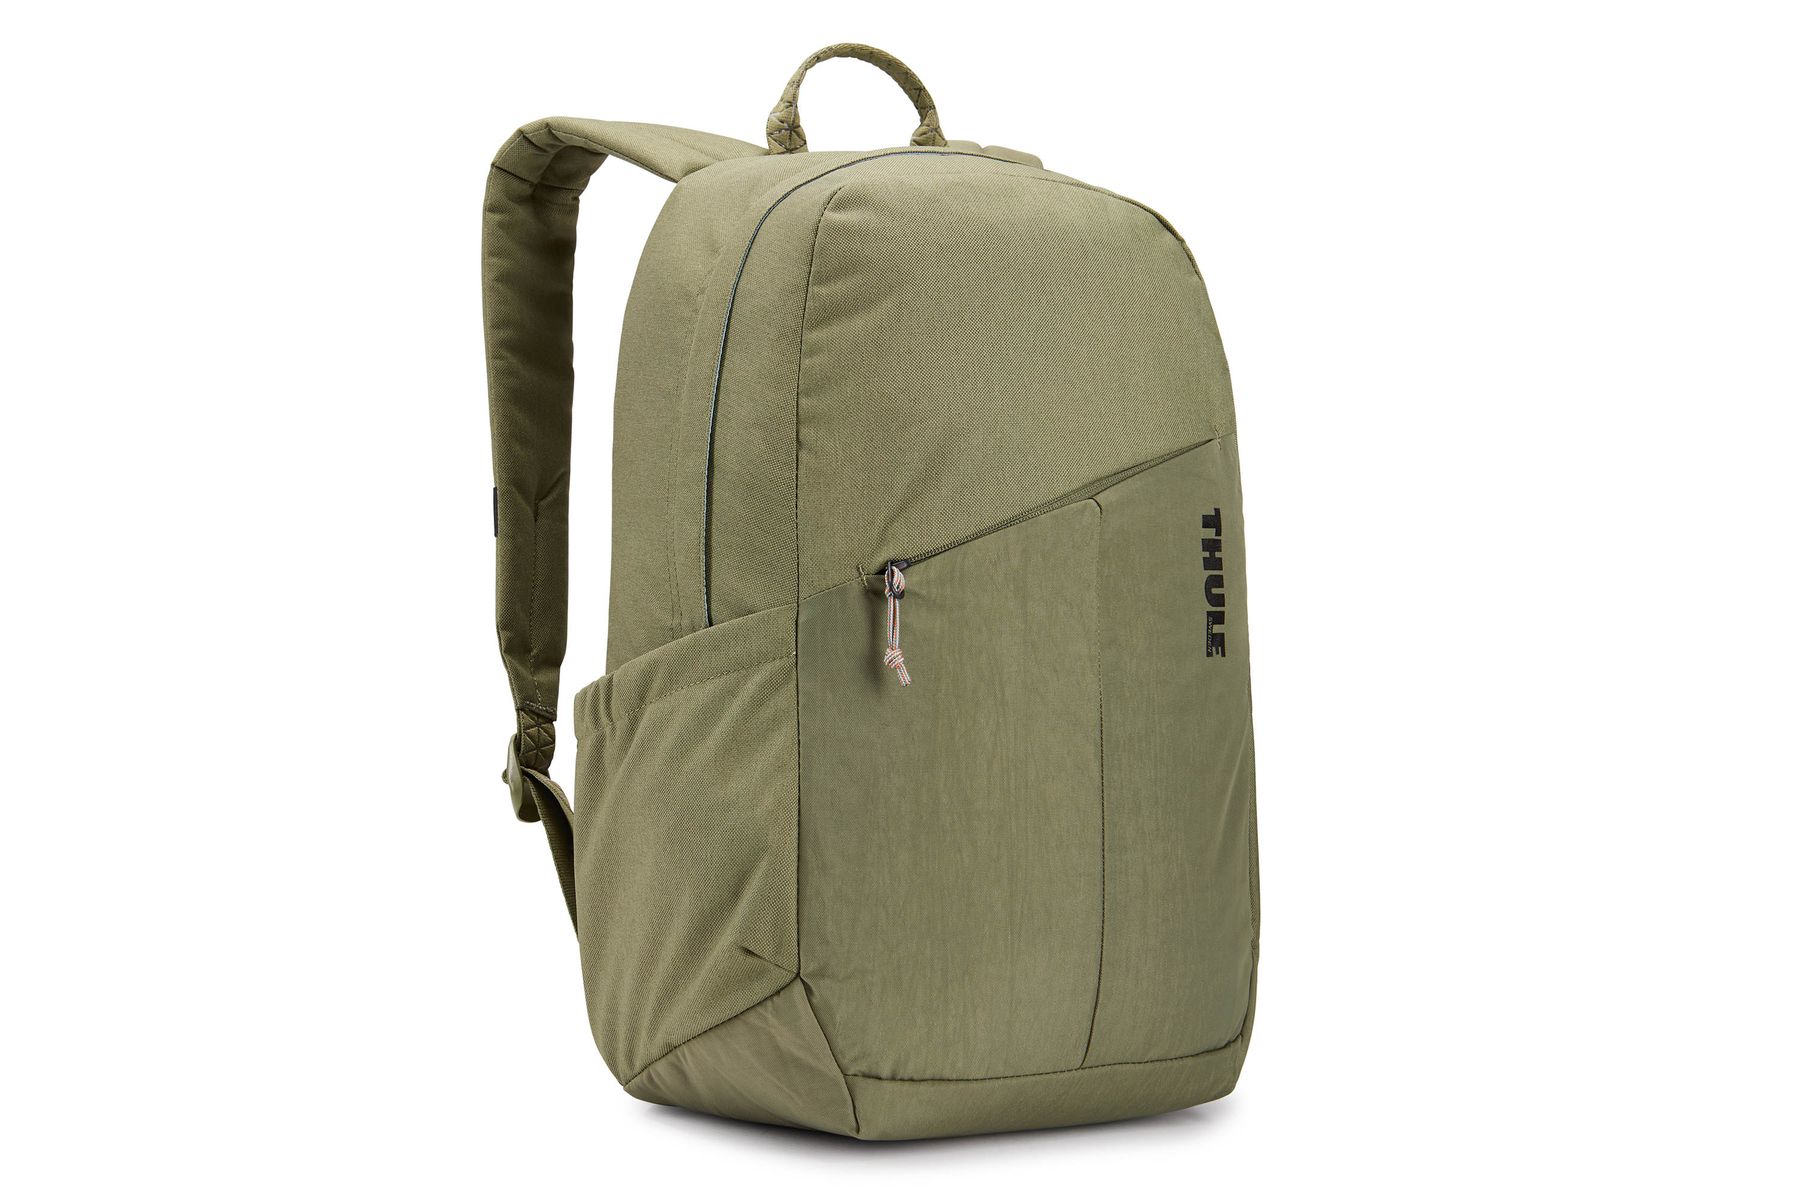 S Taille Fabricant : S FR Thule Sac à Dos Campus Notus Backpack TCAM-6115 Olivine Mixte Adulte